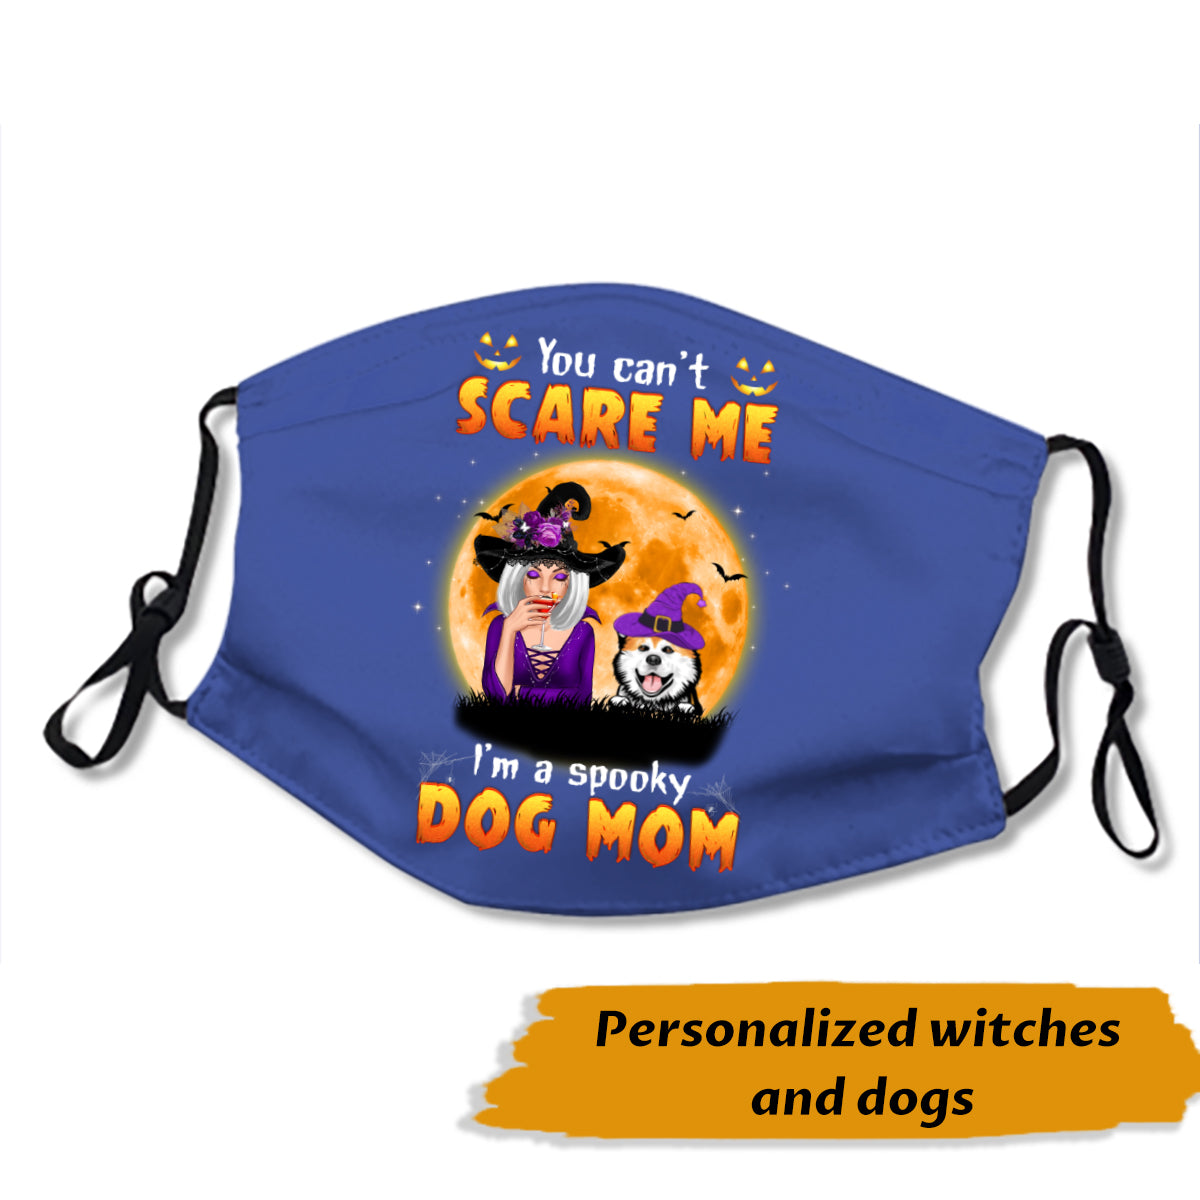 You Can't Scare Spooky Dog Mom パーソナライズド ハロウィン フェイスマスク